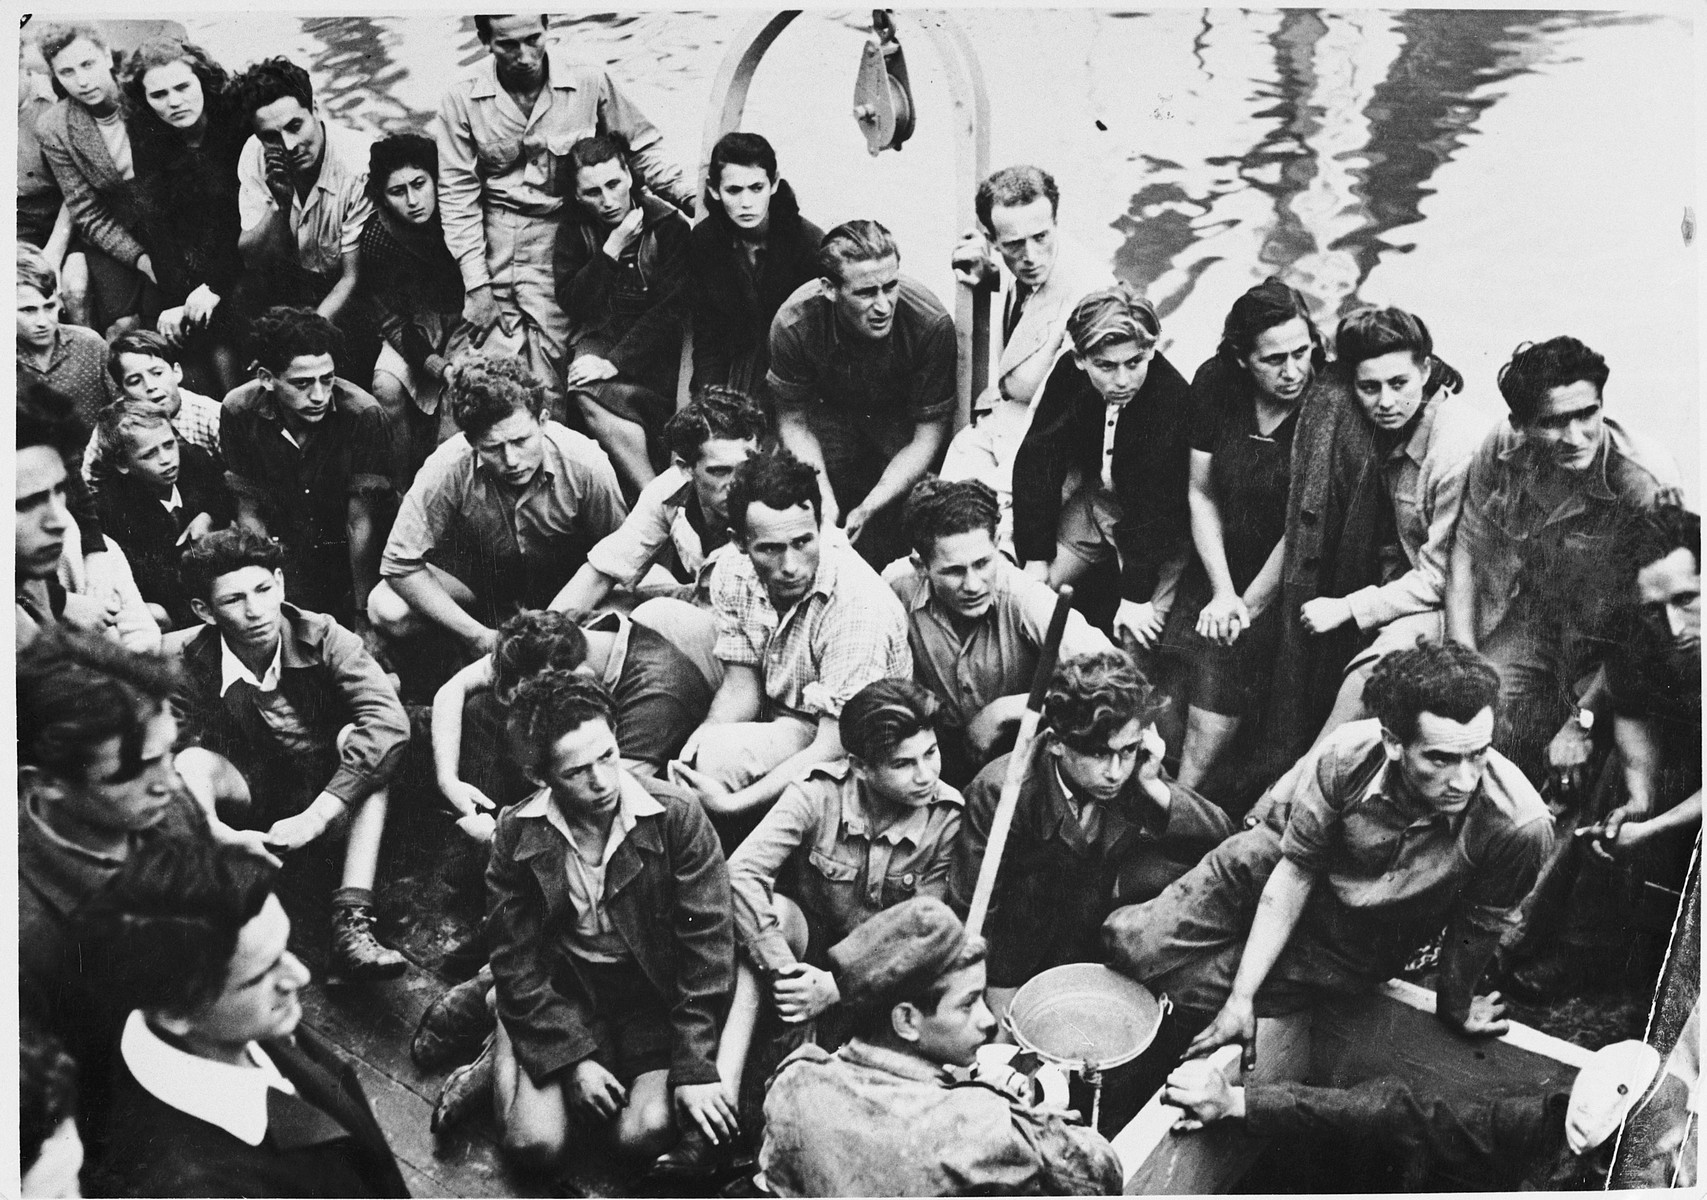 Jewish DPs who are members of the Migdalor hachshara, a maritime Zionist collective in Fano, Italy, crowd on the deck of a fishing boat.

Among those pictured are Kozik (bottom, left); middle row (right to left): Sevek, unknown, Zucker. and Vladek.  Top row (right to left): Daniel Sarchuk, Sigmund Zelig Braun, Eshter Nessel, her mother, unknown, Yaakov Neihof, Patt, Rusha, Zlatka, Karol, Roza, Yidl, Leah Rosenberg, and Chana Beler.